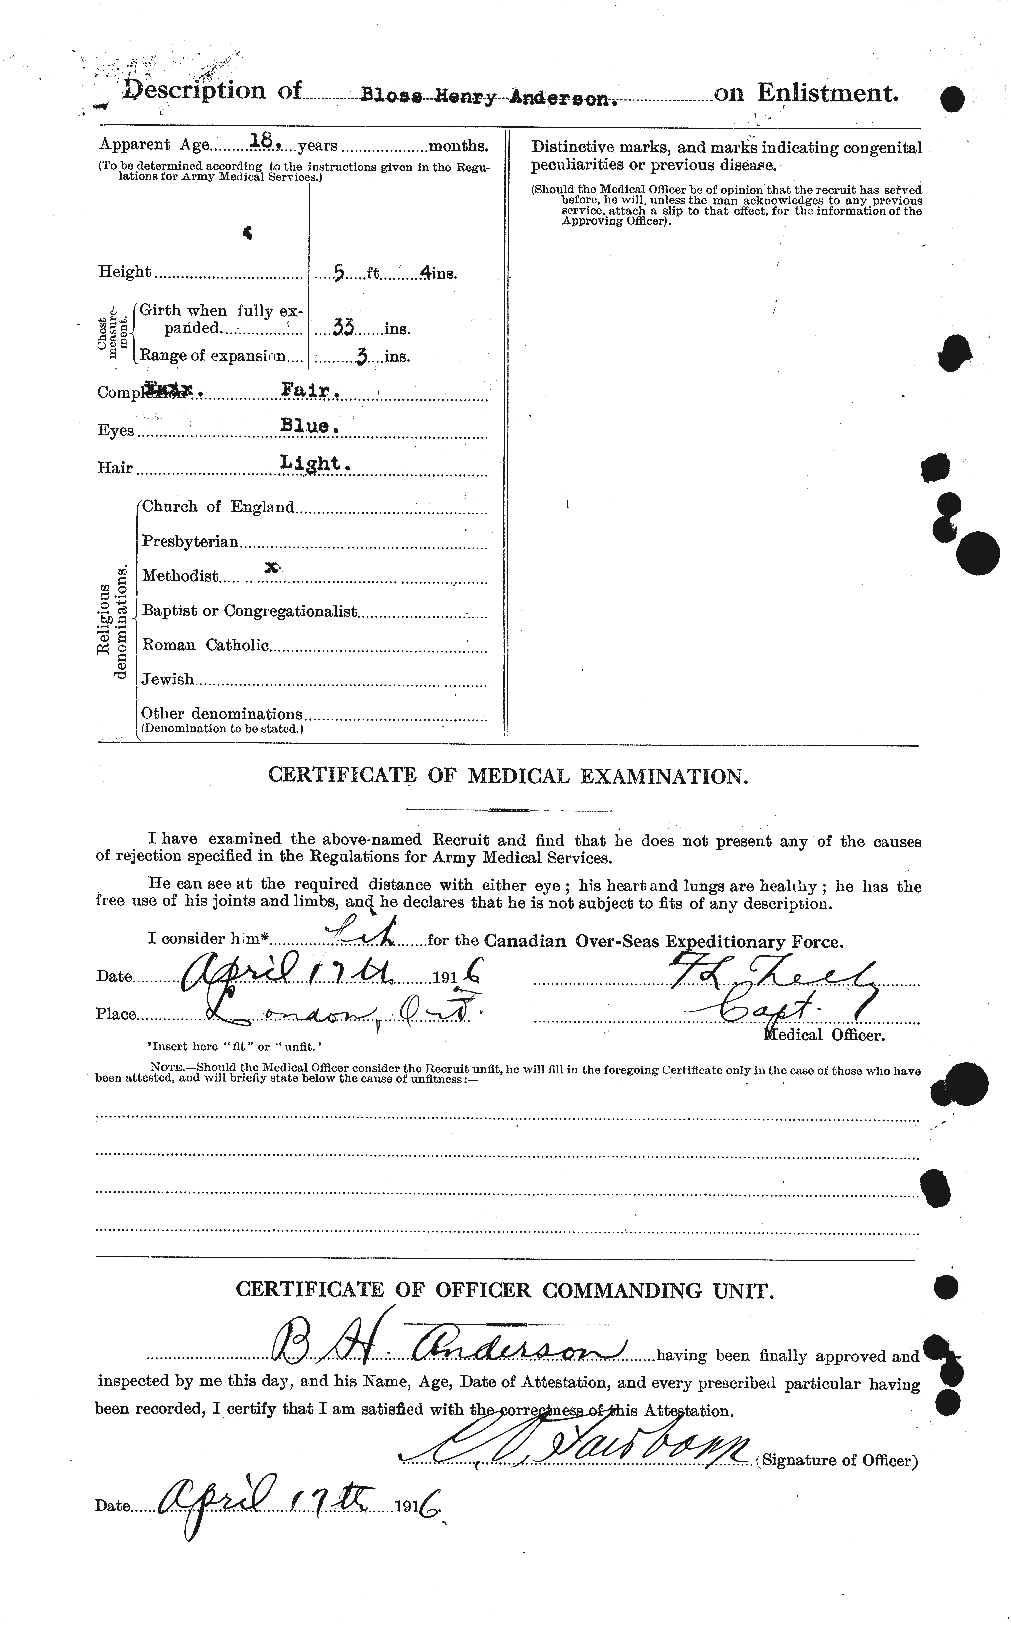 Personnel Records of the First World War - CEF 209308b